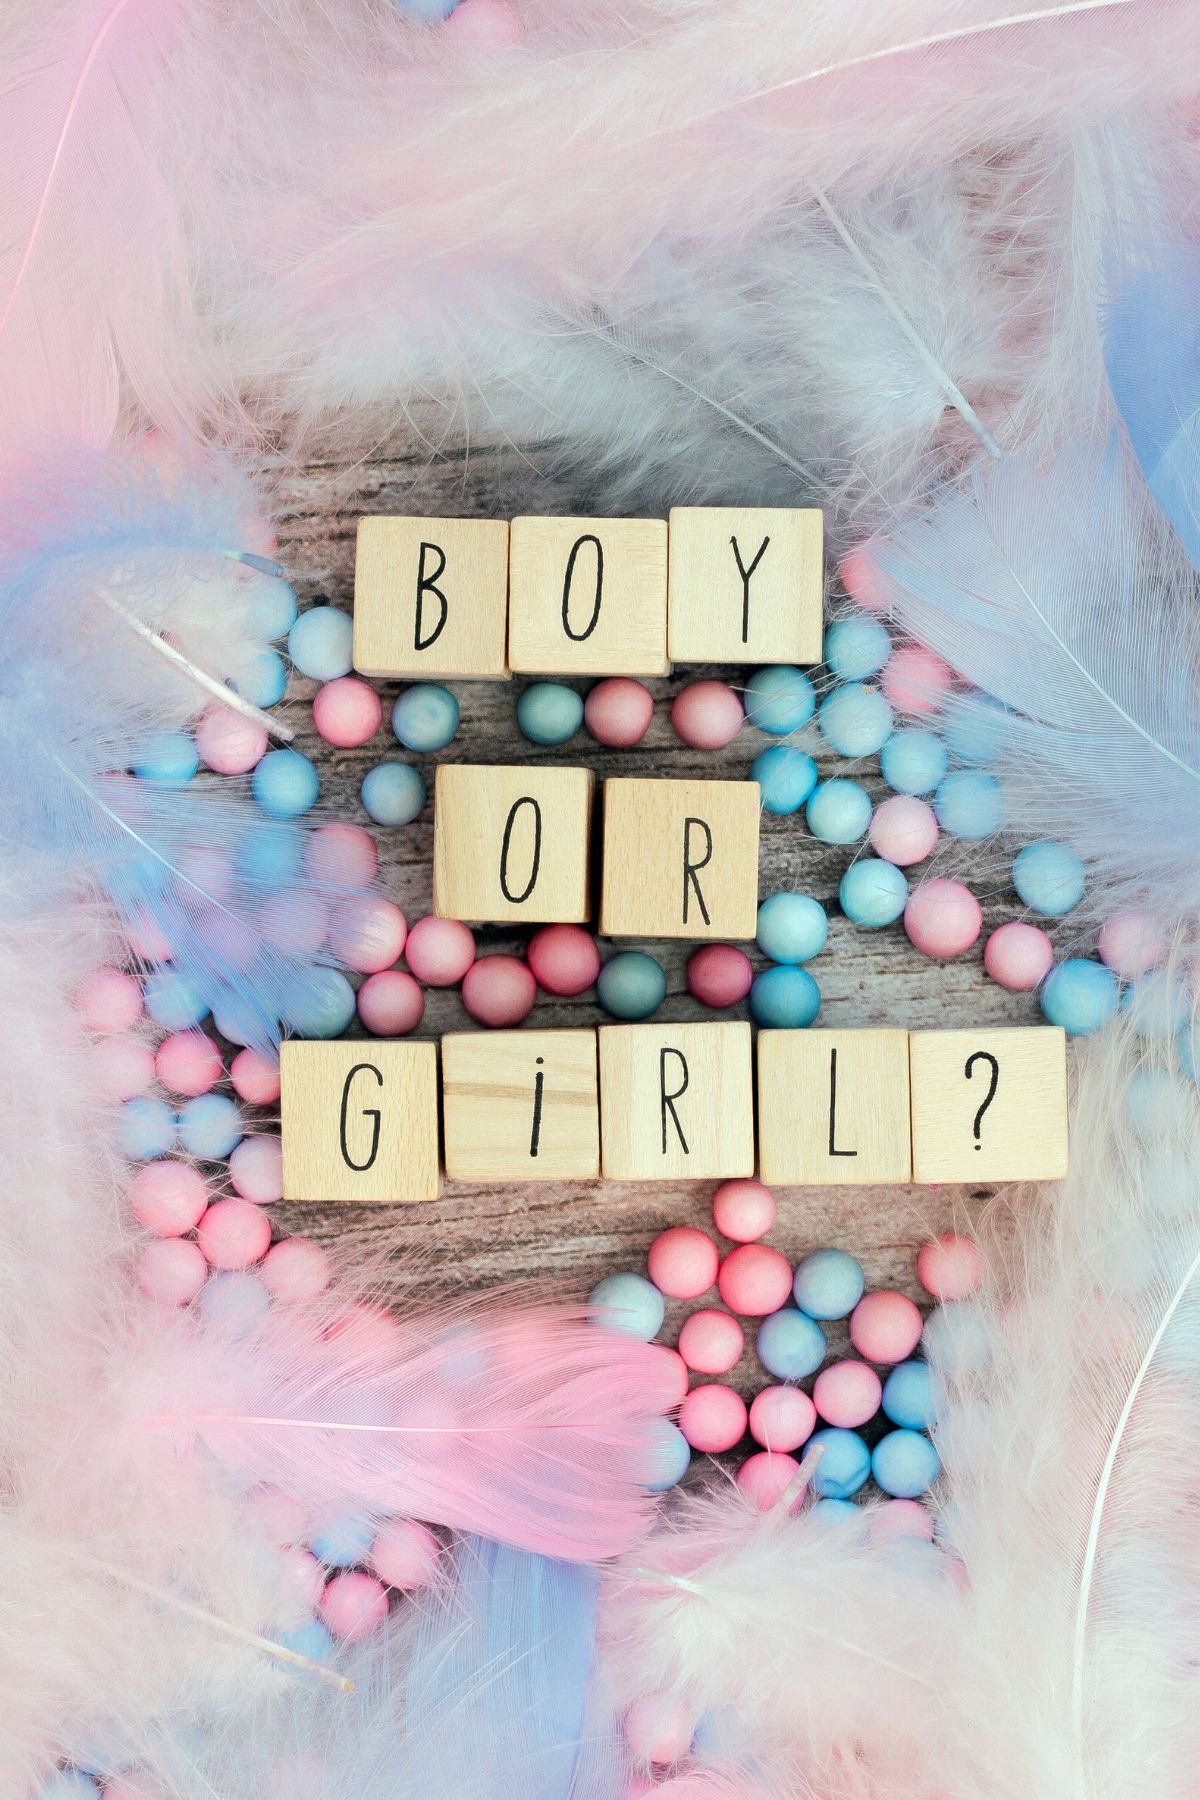 Wooden blocks that spell boy or girl over pink and blue decorations.